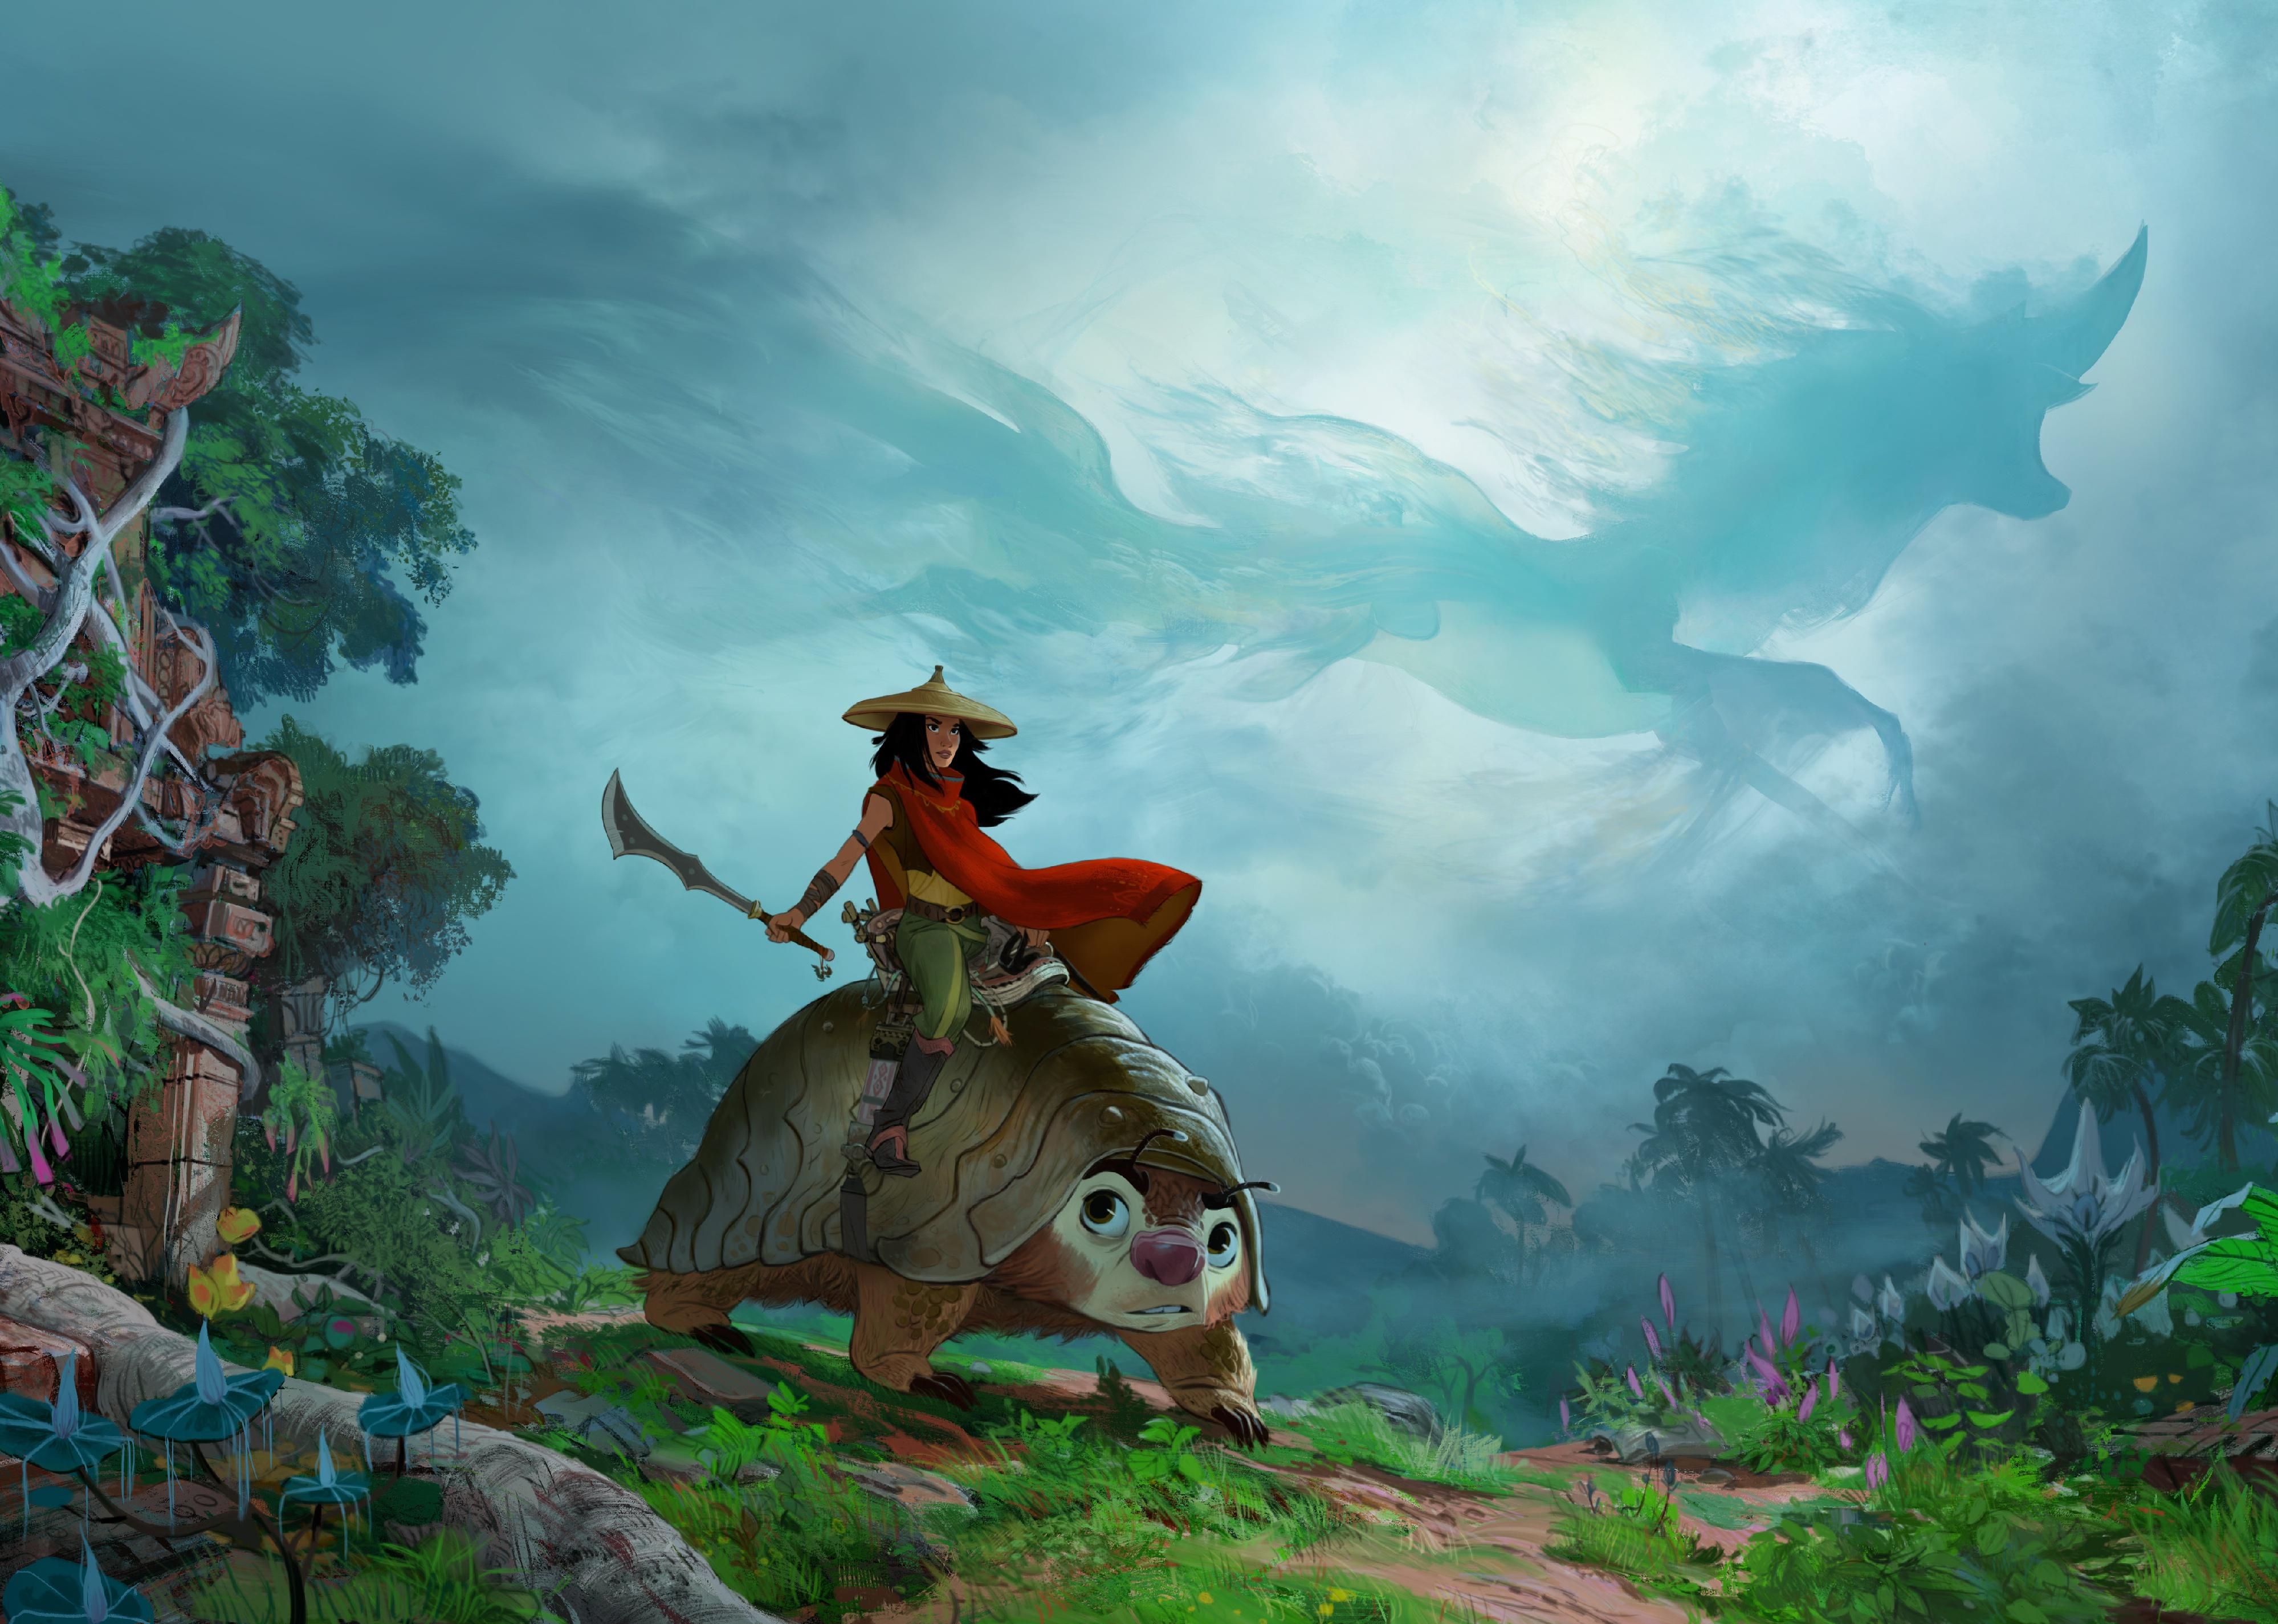 An animation of a woman riding a shelled creature in a jungle with a horse-shaped cloud in the background.